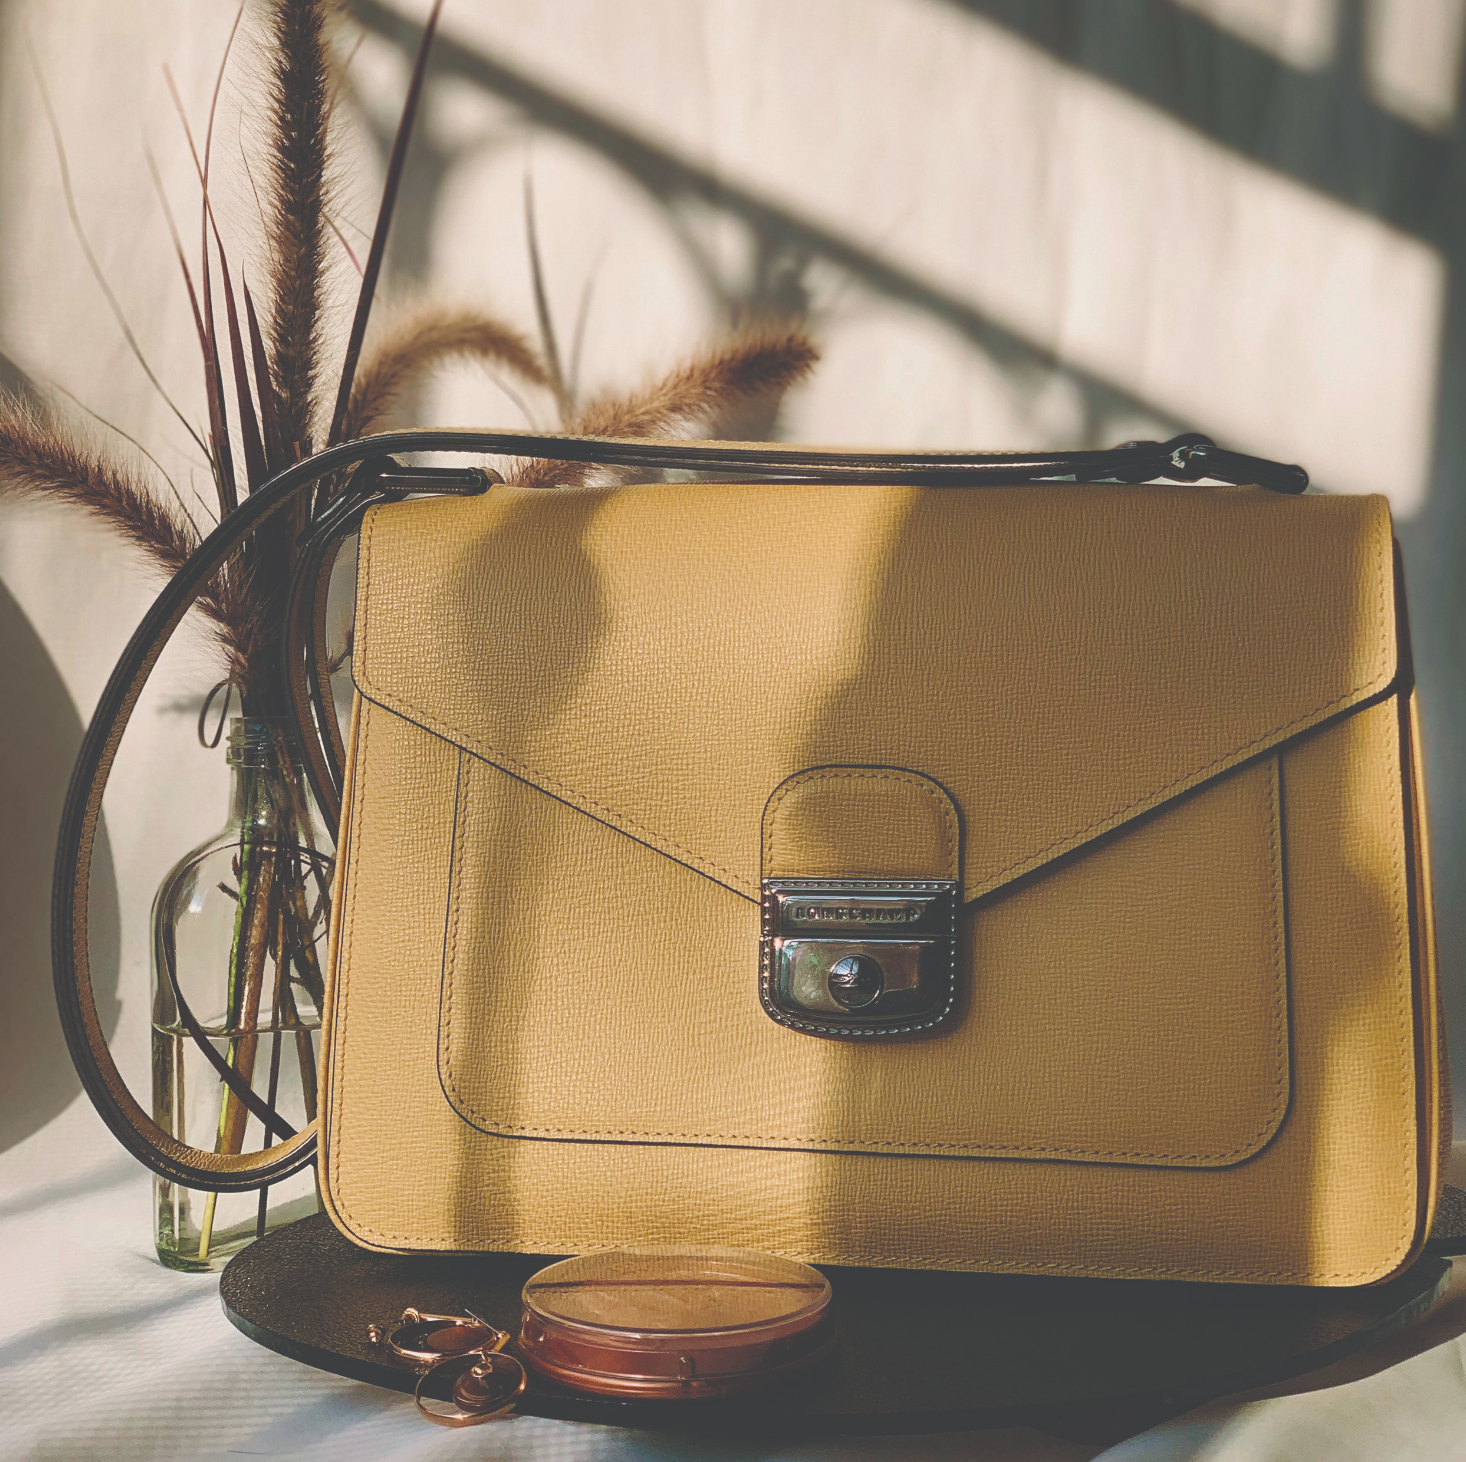 12 Eco-Friendly, Vegan, and Ethical Bag Brands